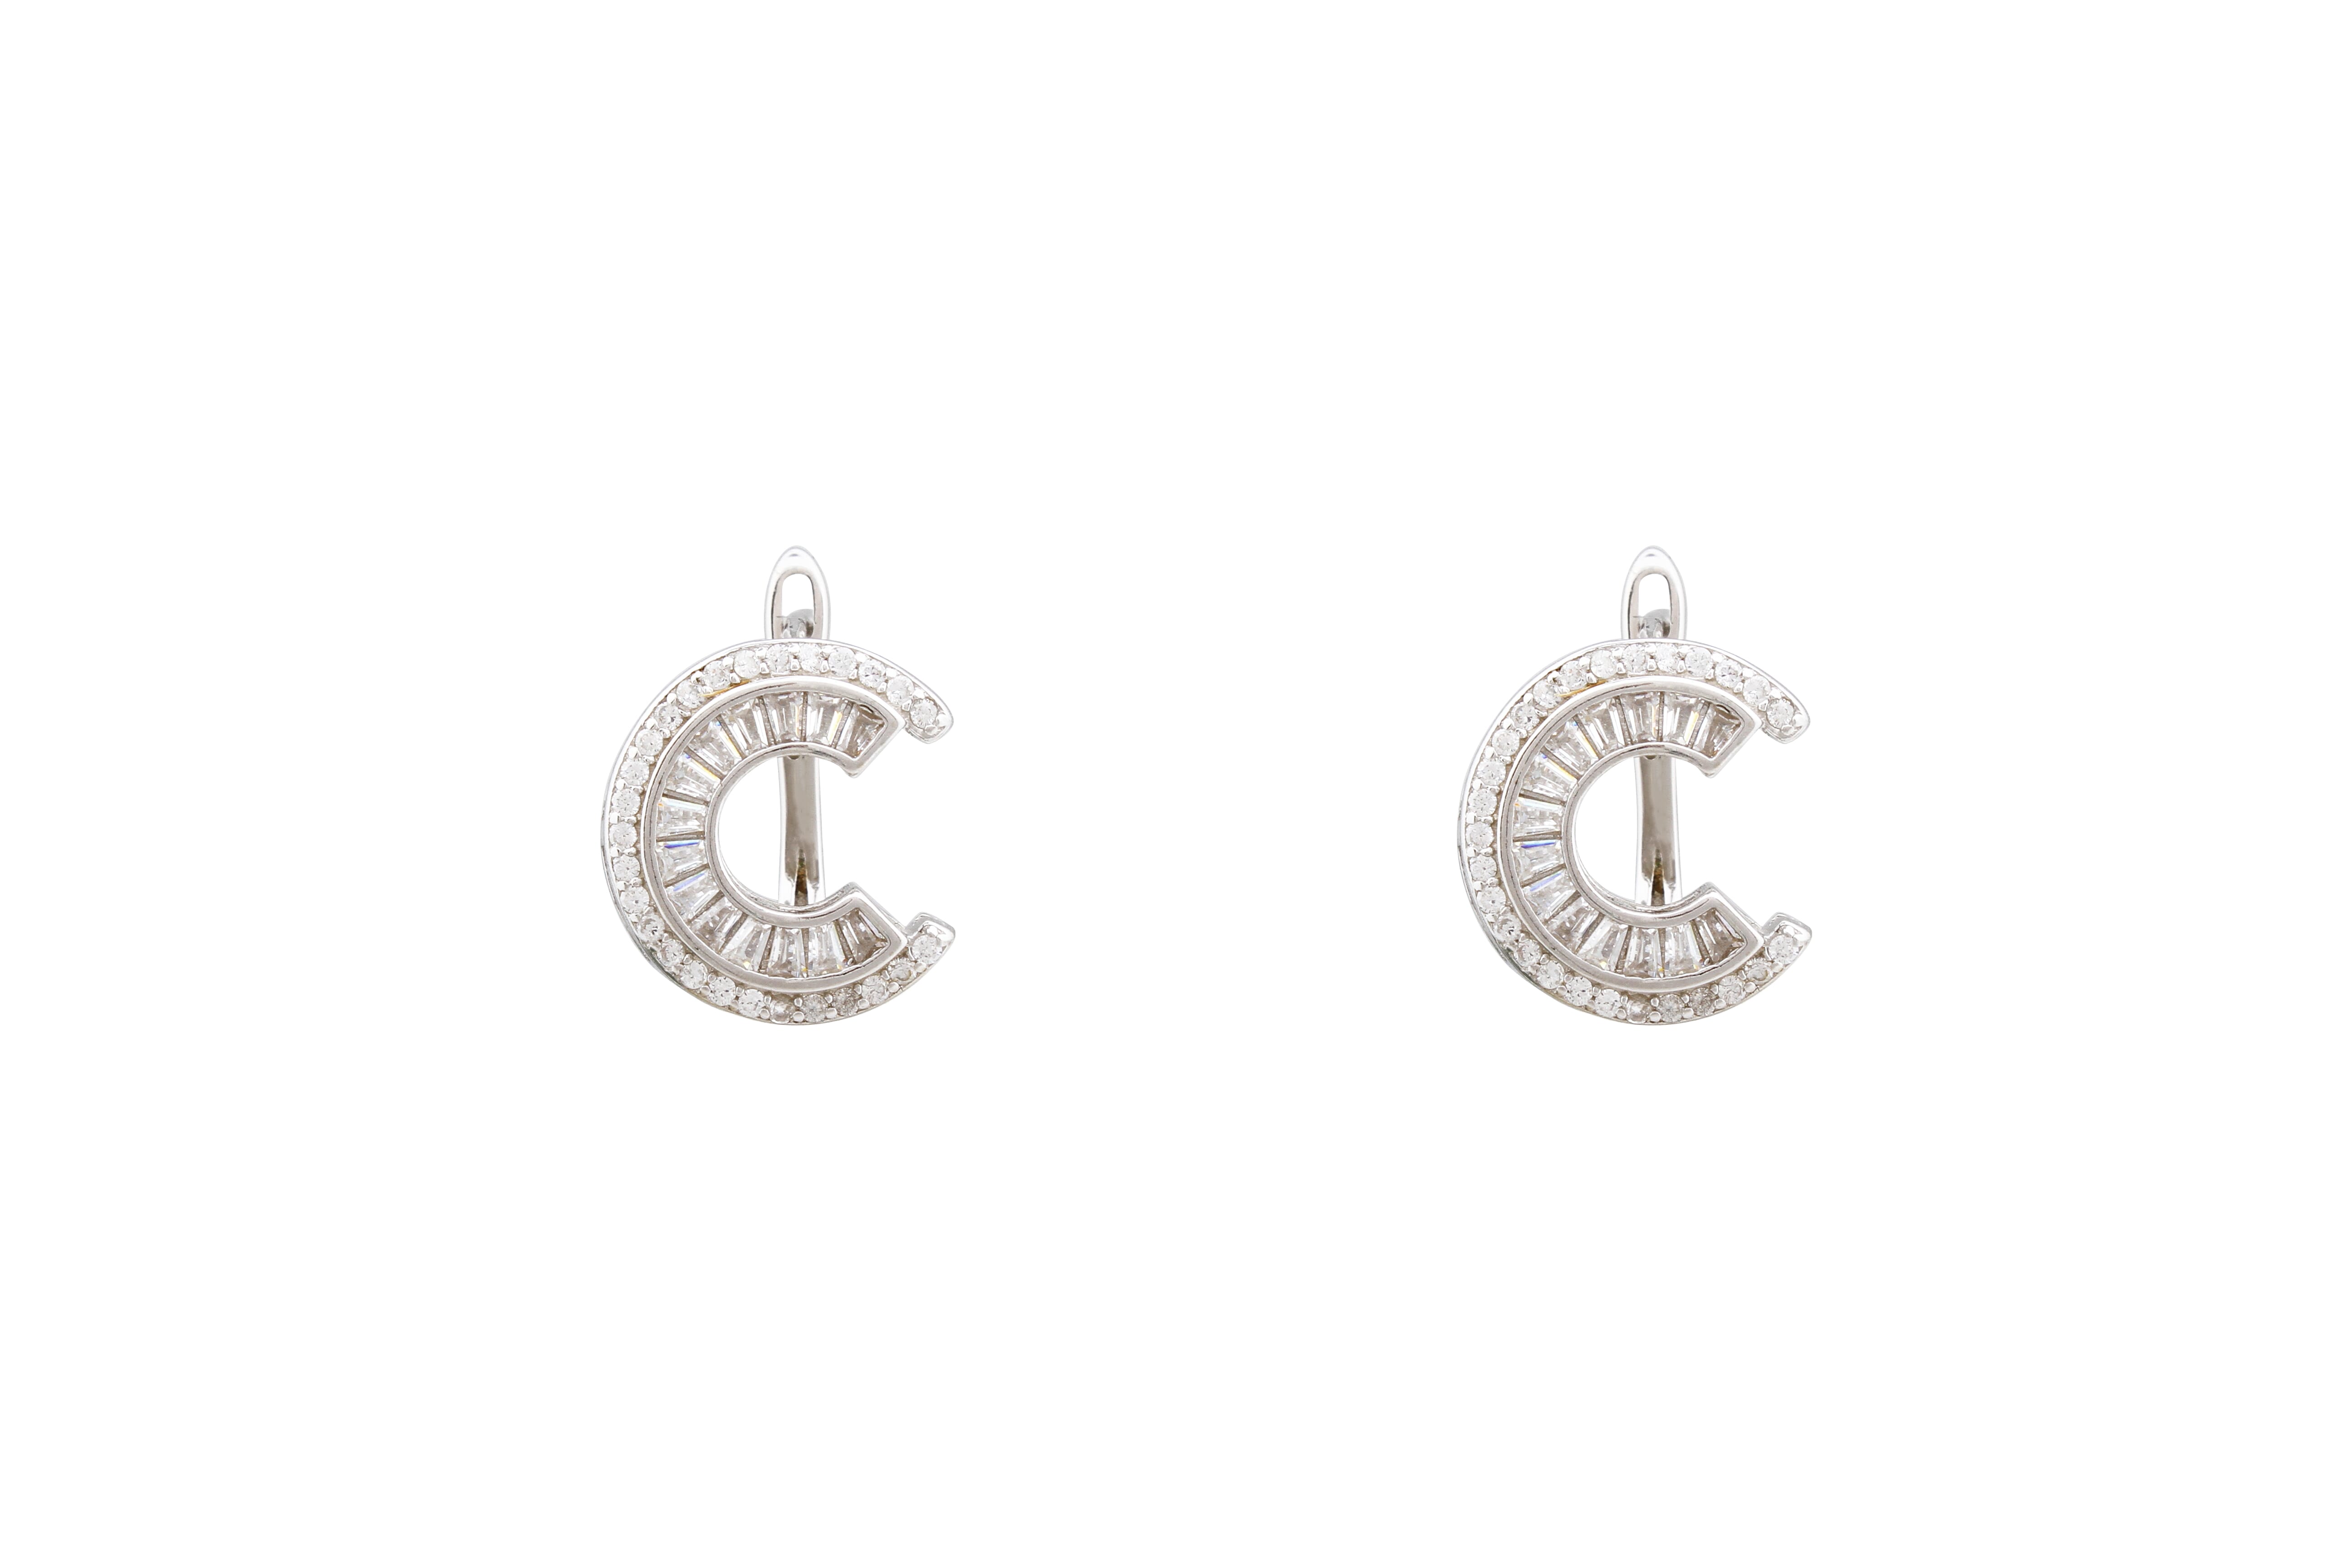 Asfour Crystal Clips Earrinsg With C Design In 925 Sterling Silver ER0441